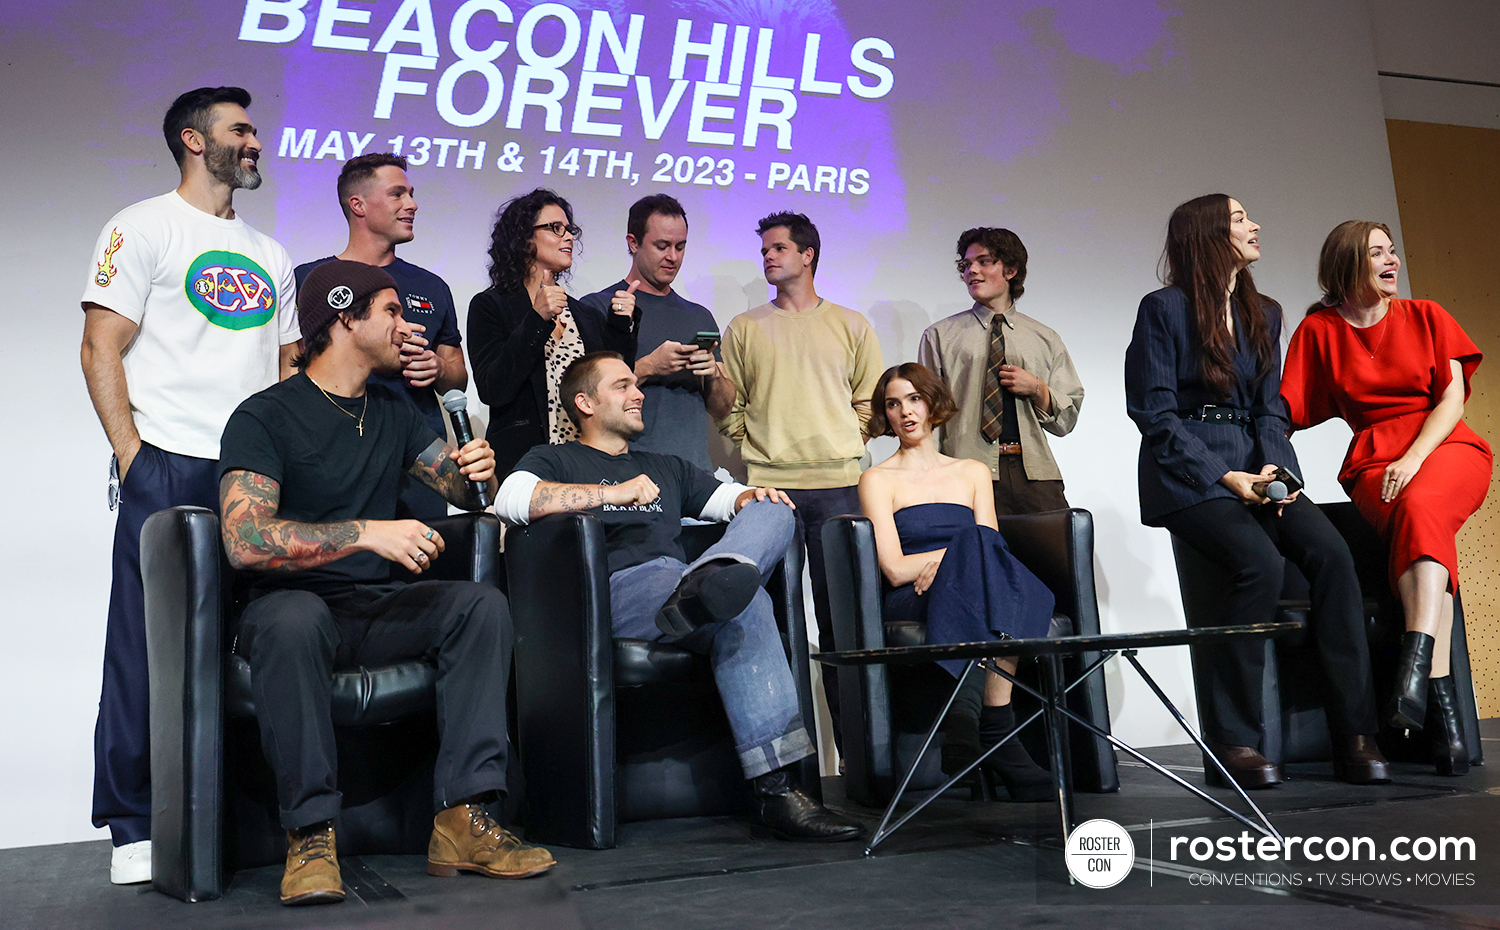 BHF: a day at the Teen Wolf convention - Roster Con